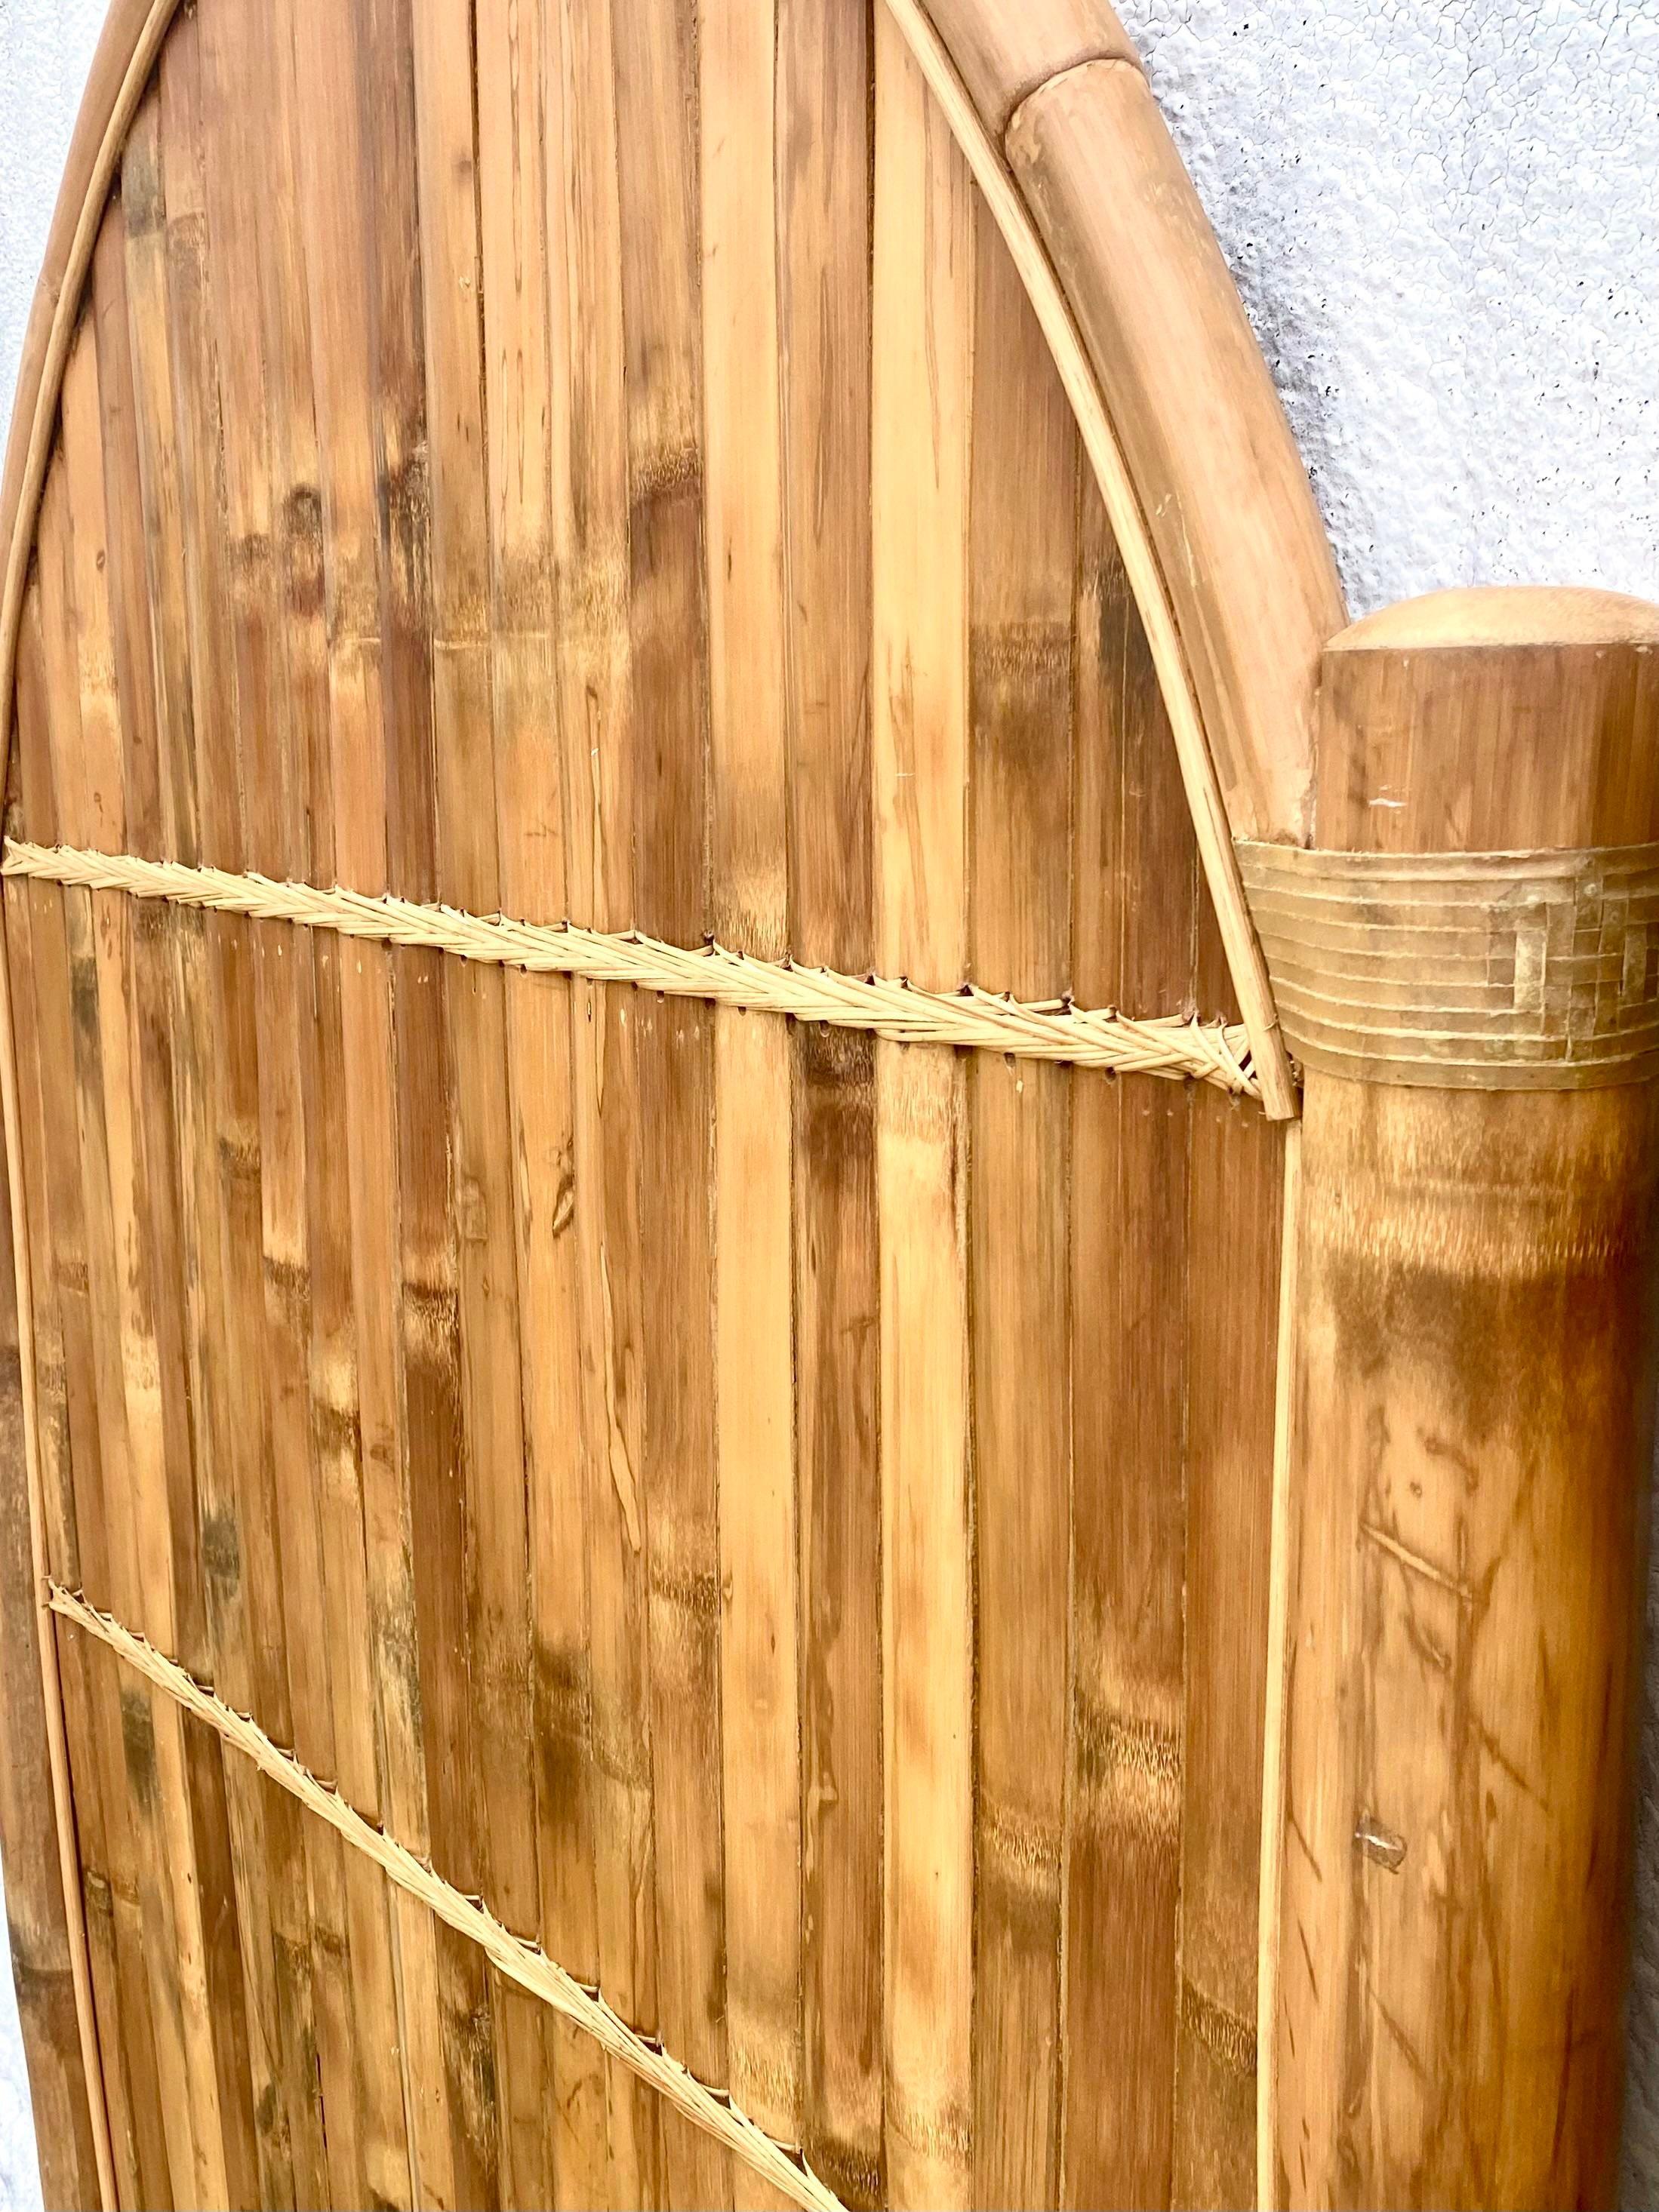 Huge and fantastic pair of vintage twin headboards. Chic high arch made from a heavy split bamboo. Wrapped leather at the joints. Acquired from a Palm Beach estate. less